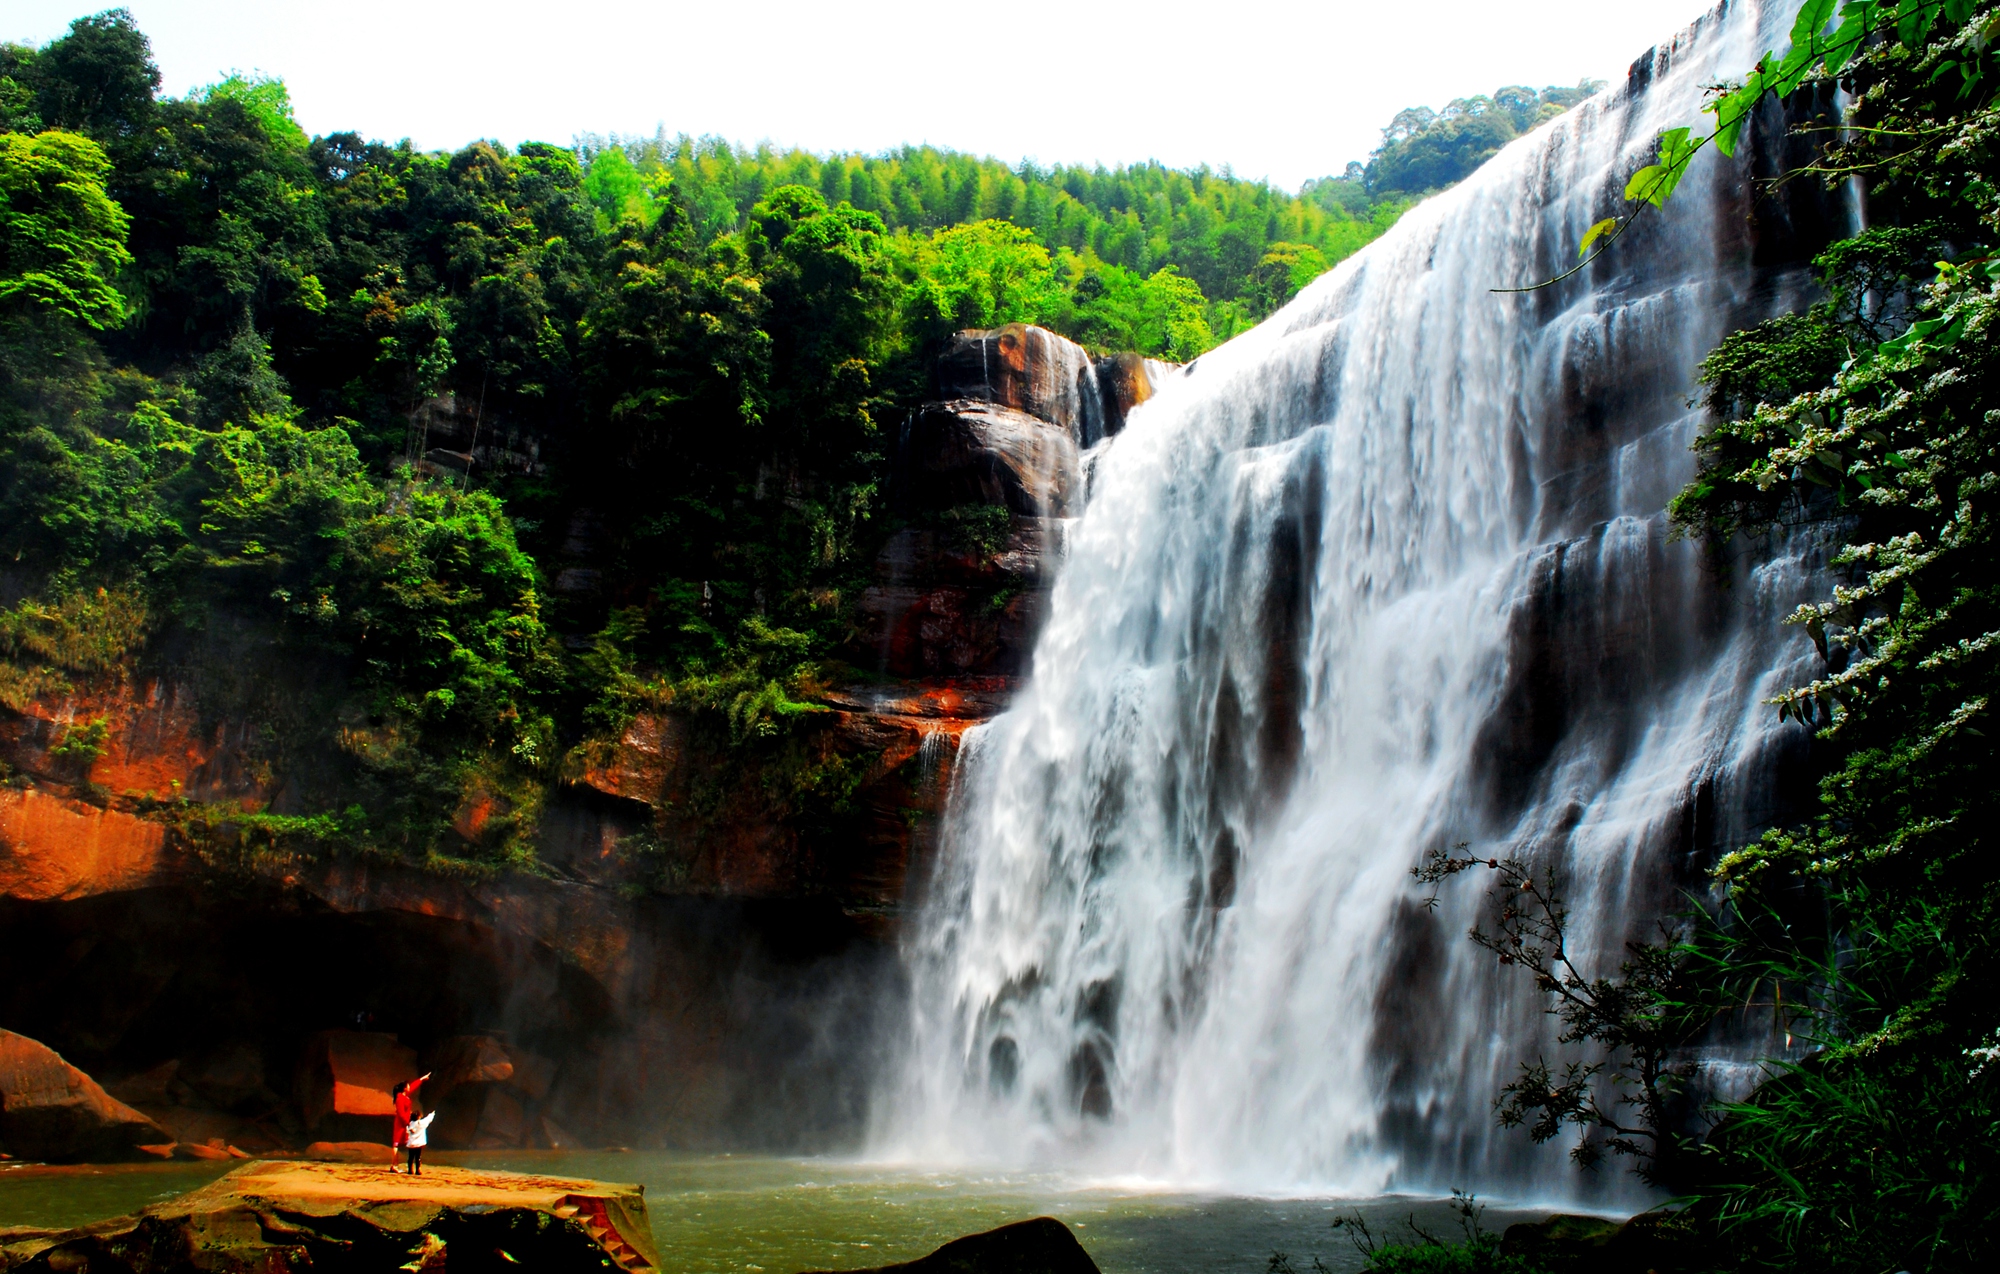 Undated photo shows the view of the Chishui Waterfall in Chishui, Guizhou Province. /Photo Provided to CGTN